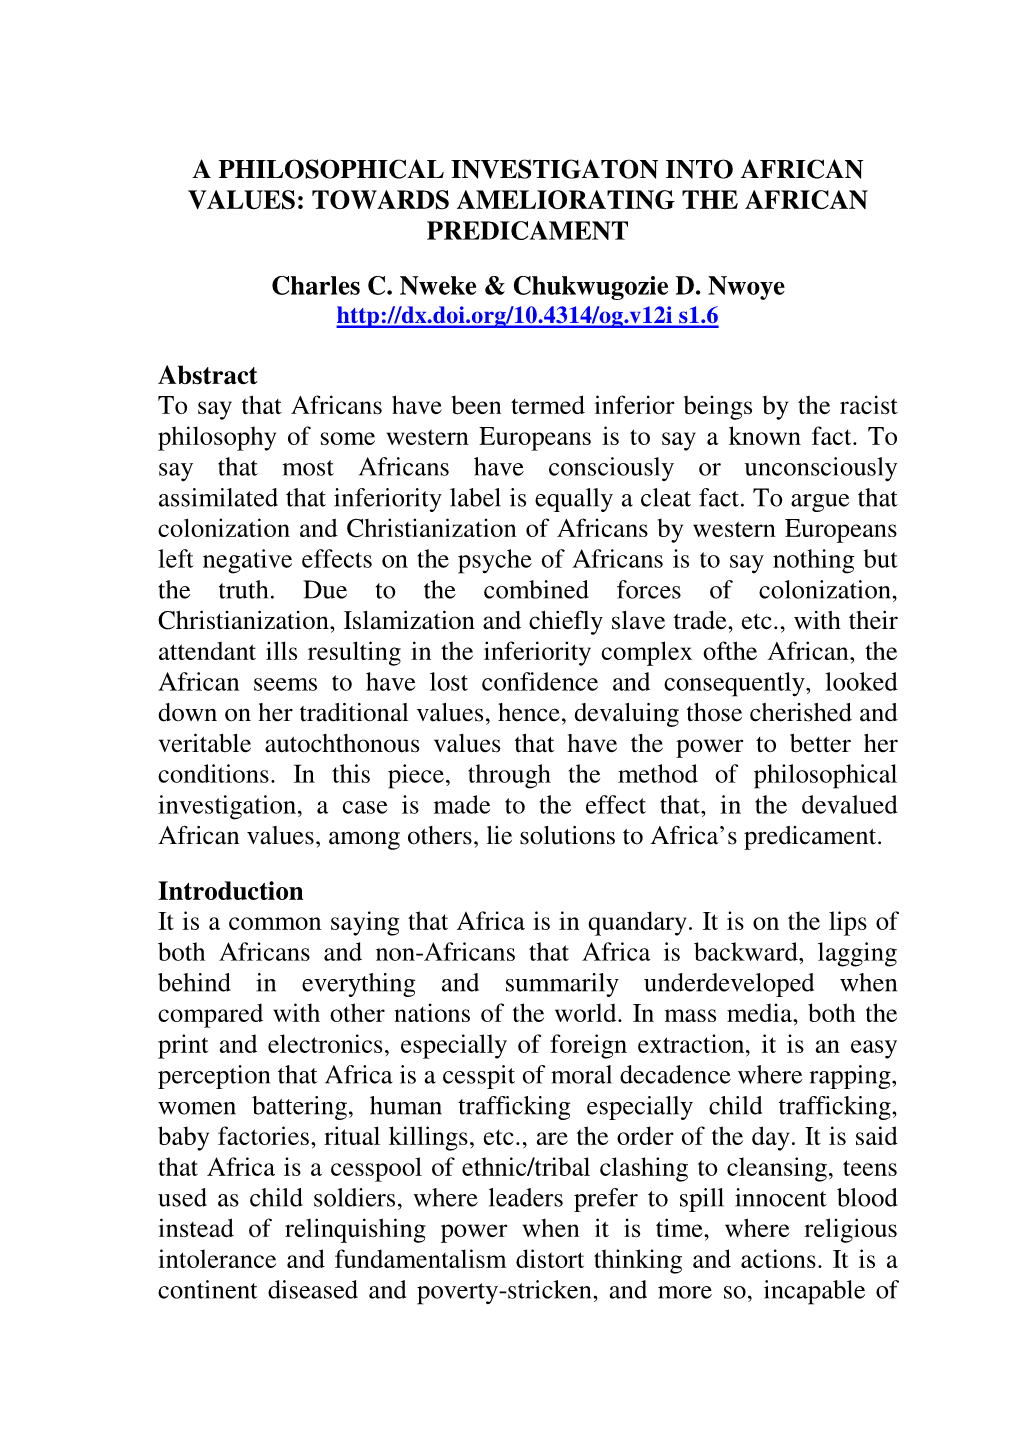 A Philosophical Investigaton Into African Values: Towards Ameliorating the African Predicament